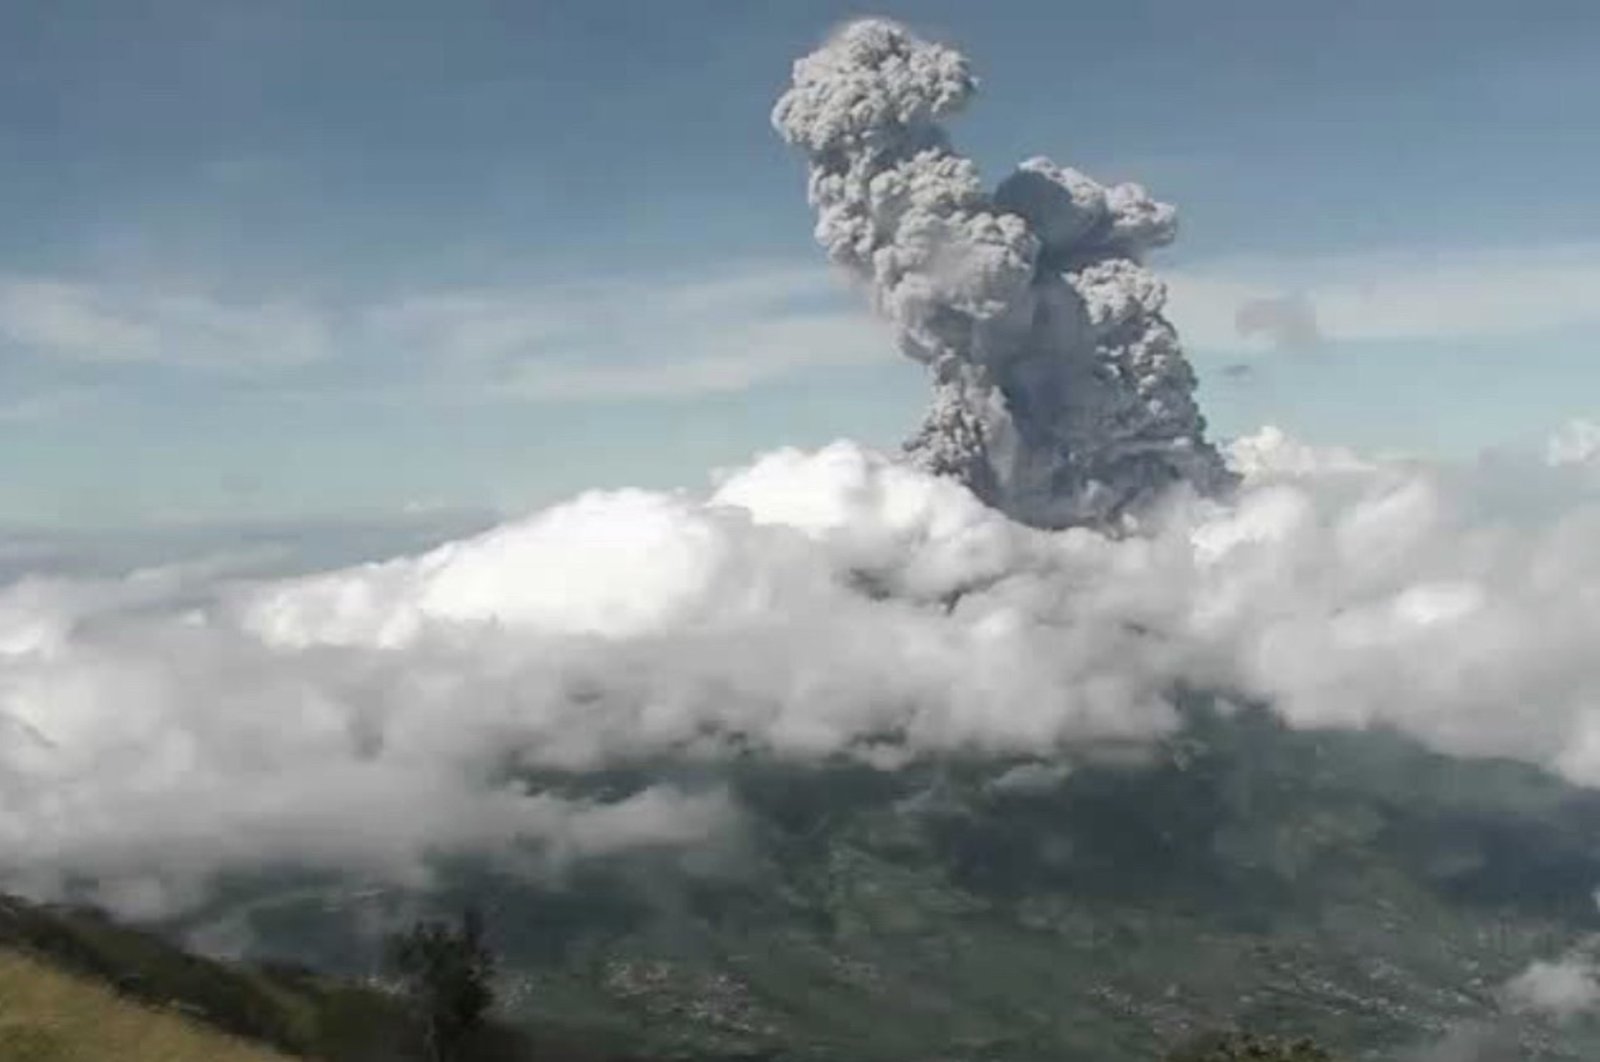 This handout photo taken and released on June 21, 2020 by Indonesia's Research and Technology Development for Geological Hazard Mitigation (BPPTKG) shows the Merapi Mount volcano spewing thick smoke into the air as seen from Yogyakarta. 